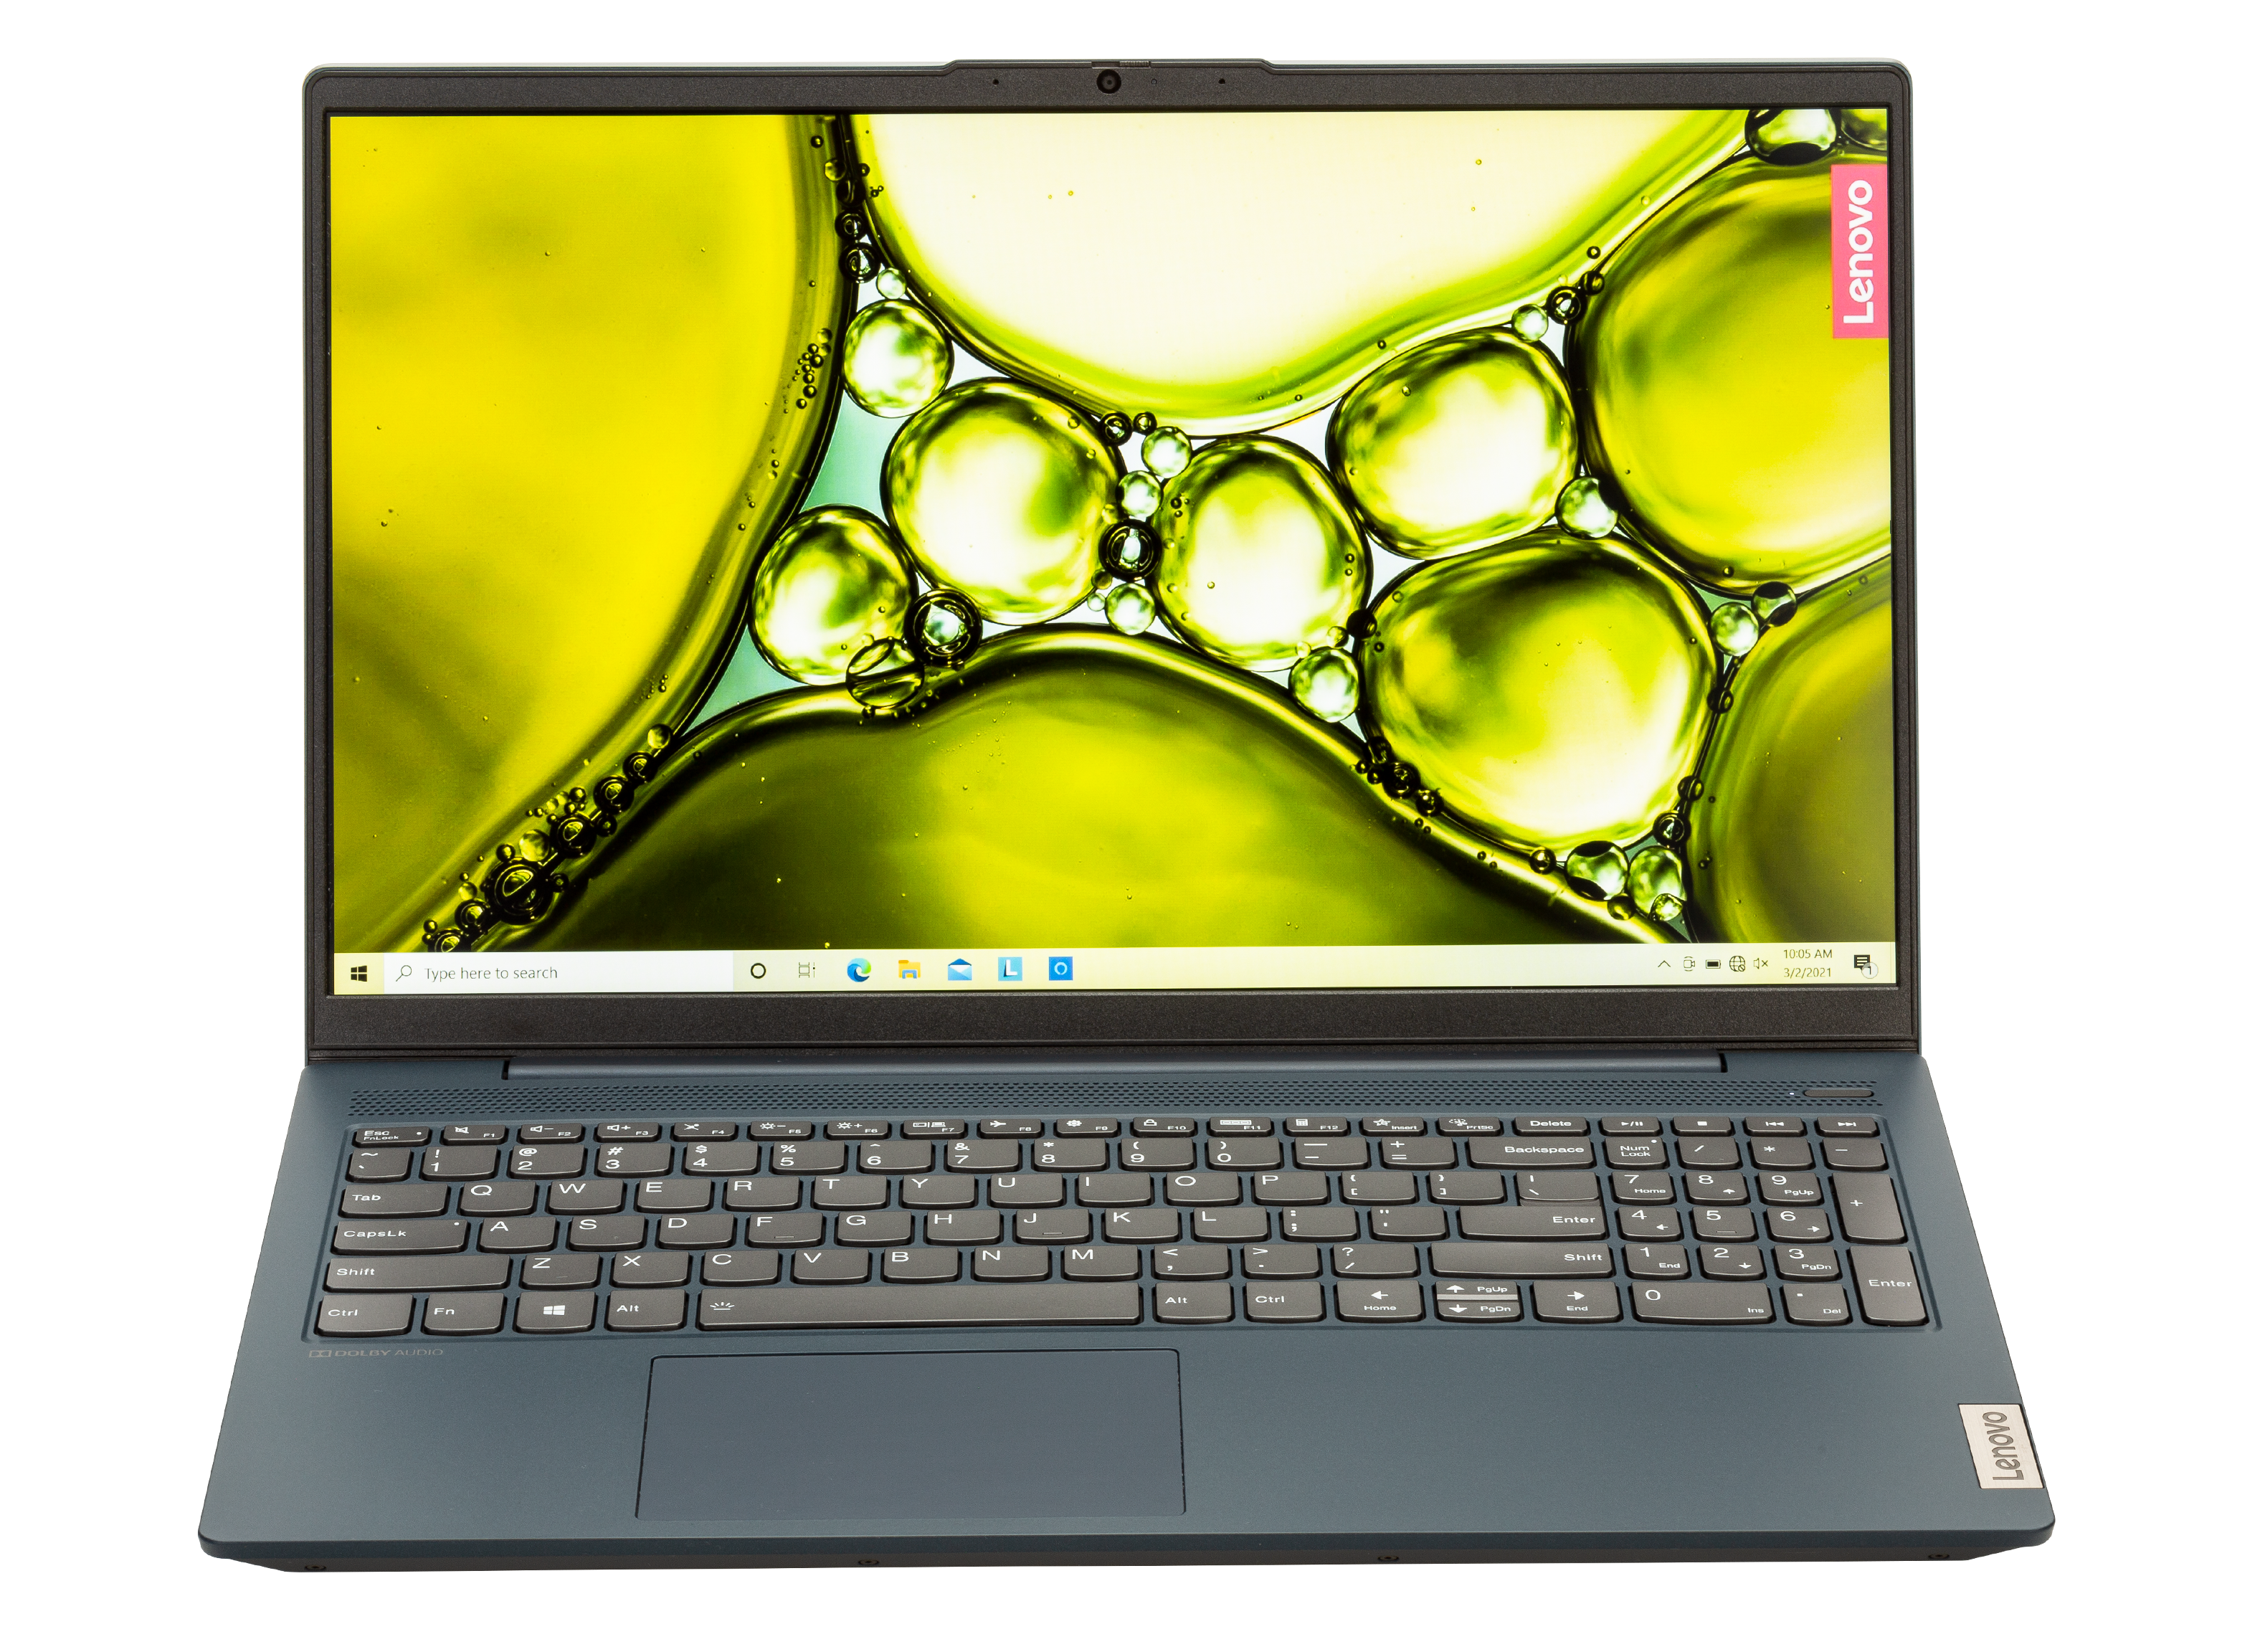 Lenovo IdeaPad 5 15ITL05 Laptop & Chromebook Review - Consumer Reports